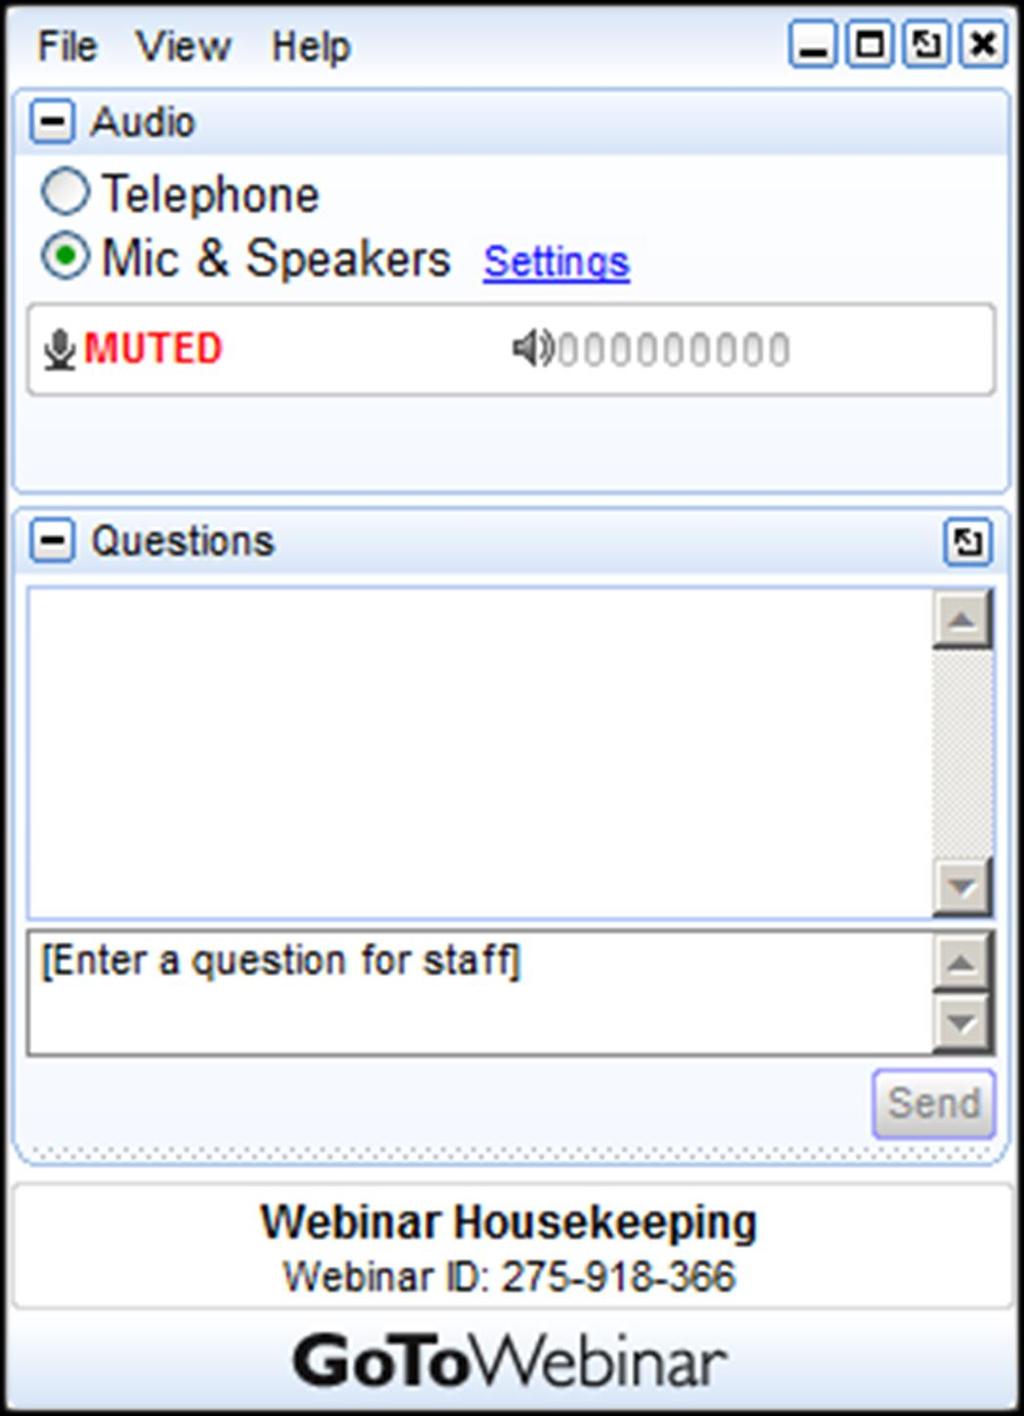 Choose Mic & Speakers to use VoIP Choose Telephone and dial